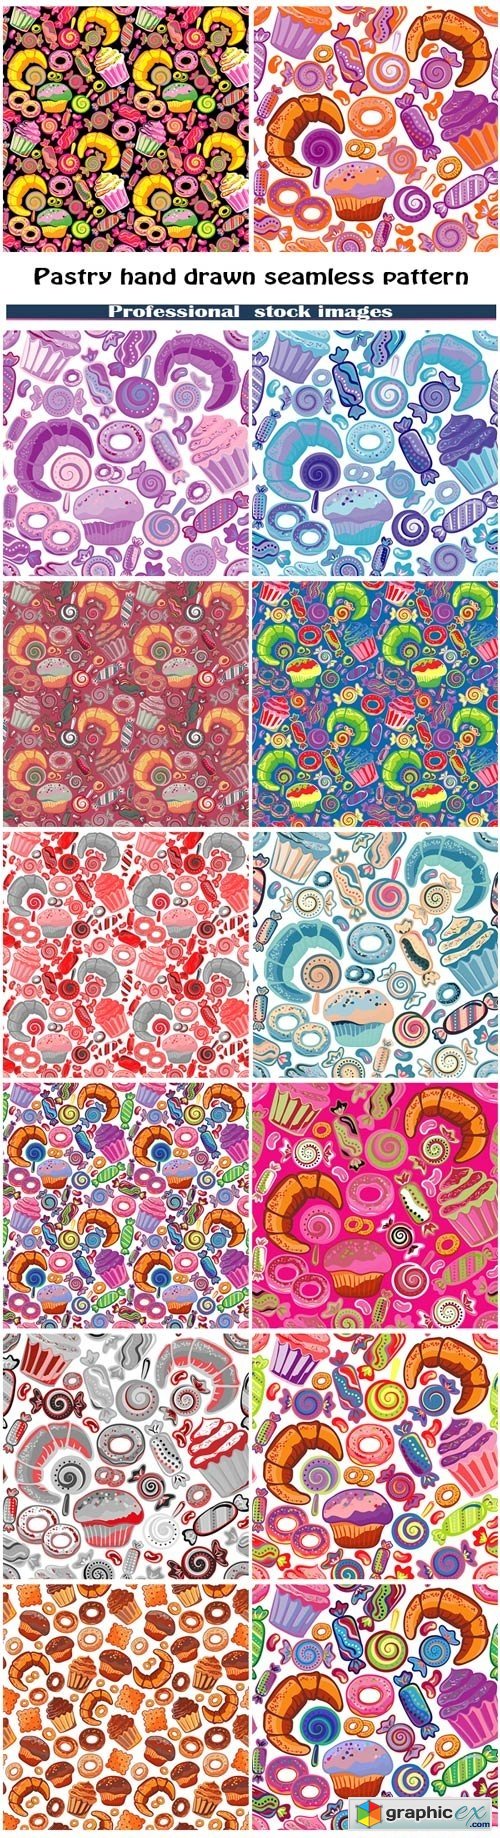 Pastry hand drawn seamless pattern